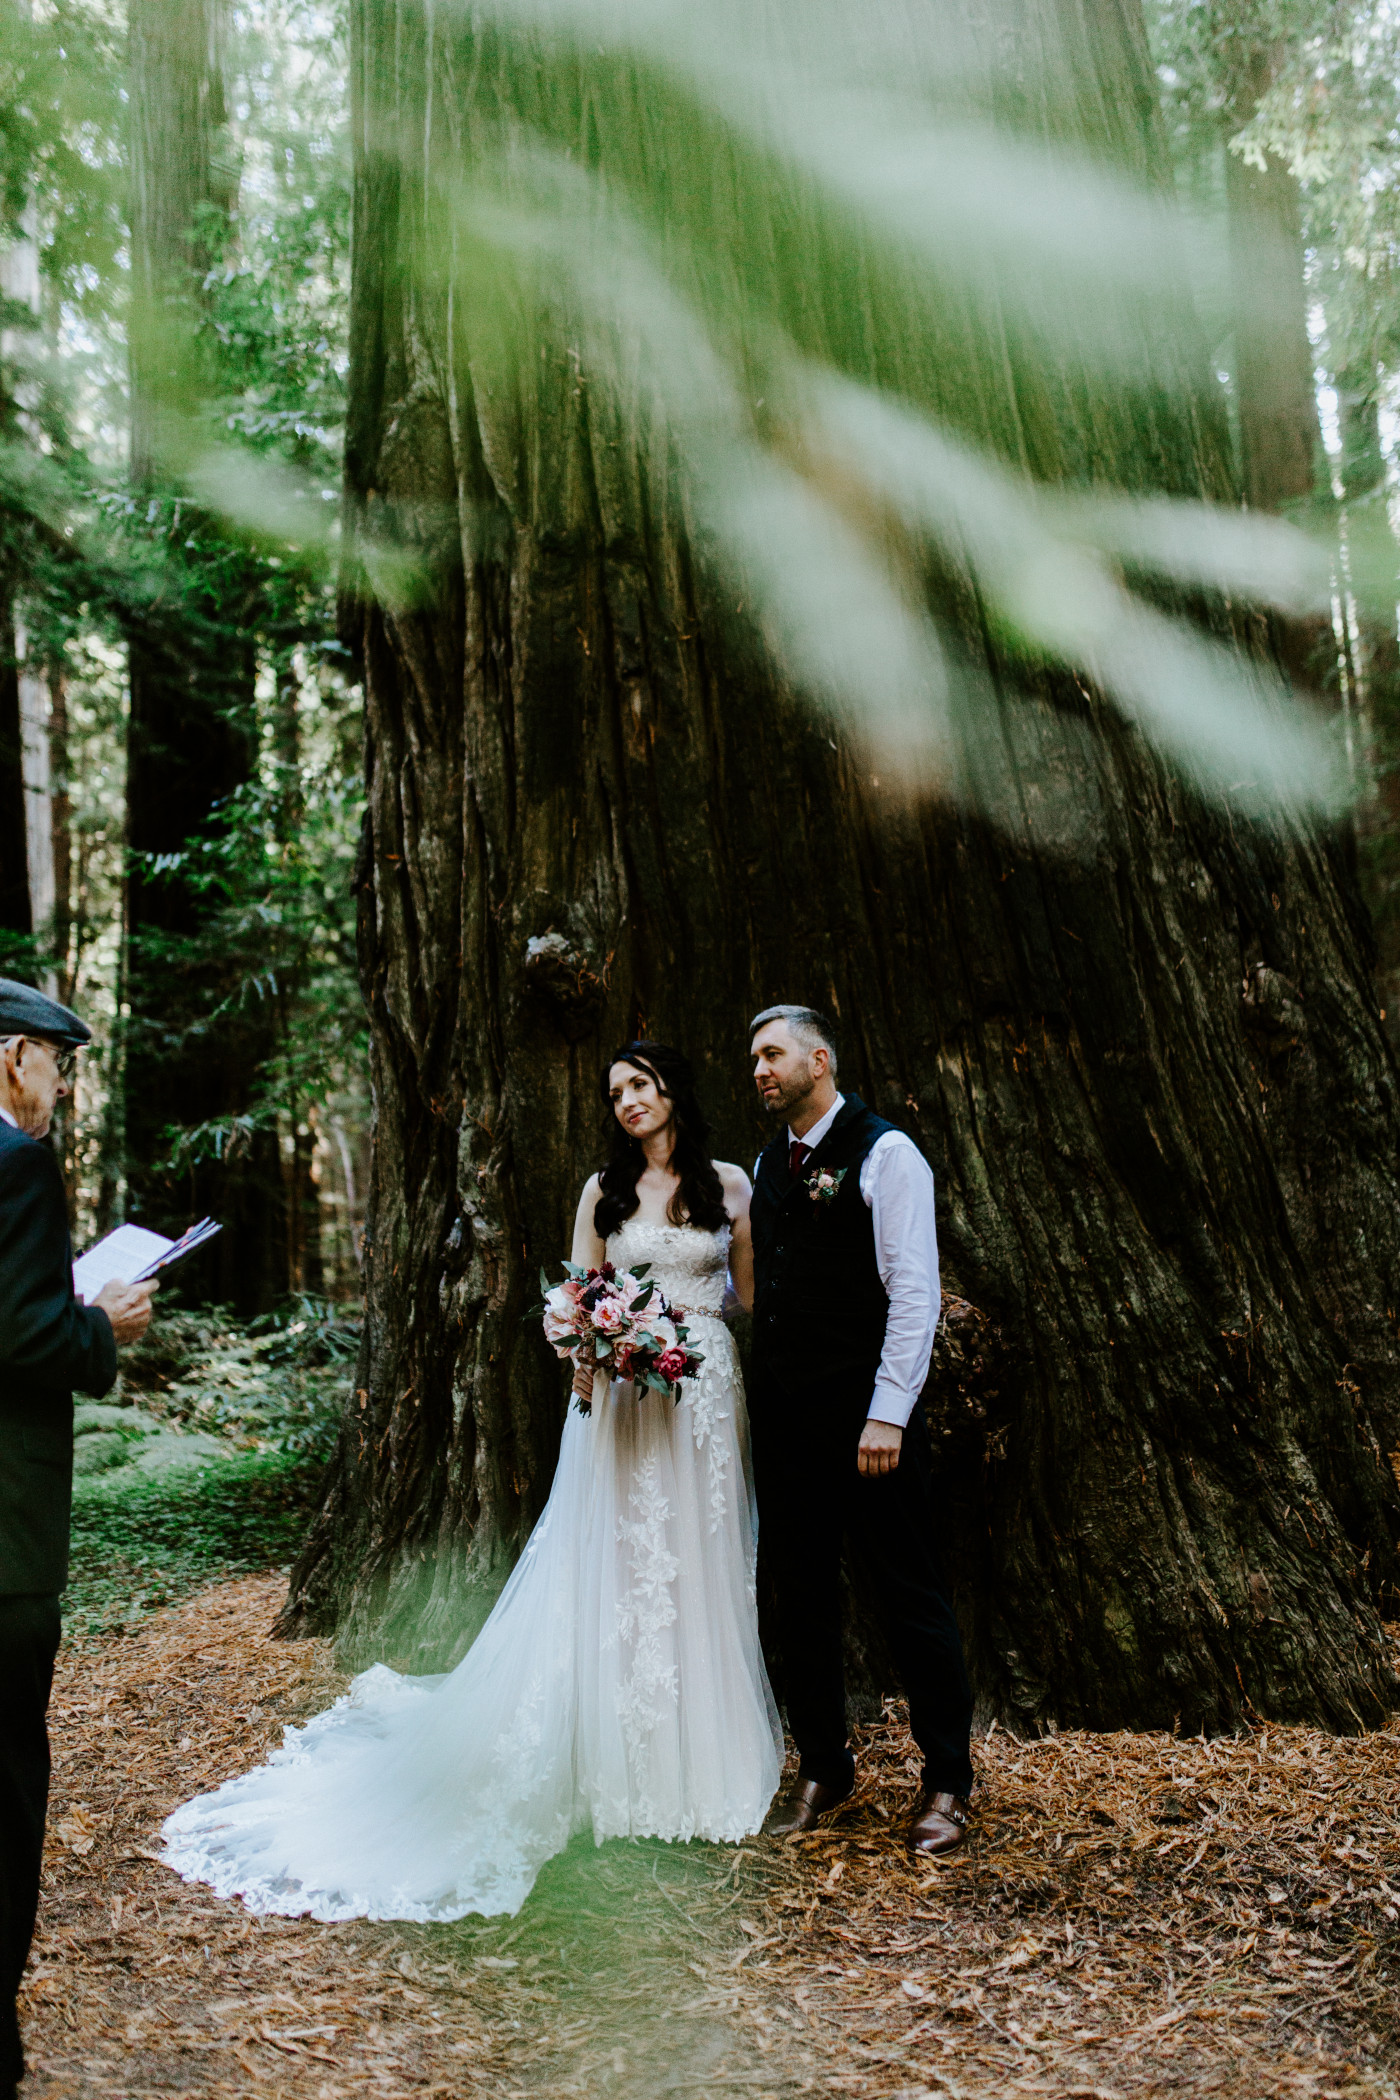 Hannah and Tim stand in front of a large tree in the California Redwoods for their elopement.